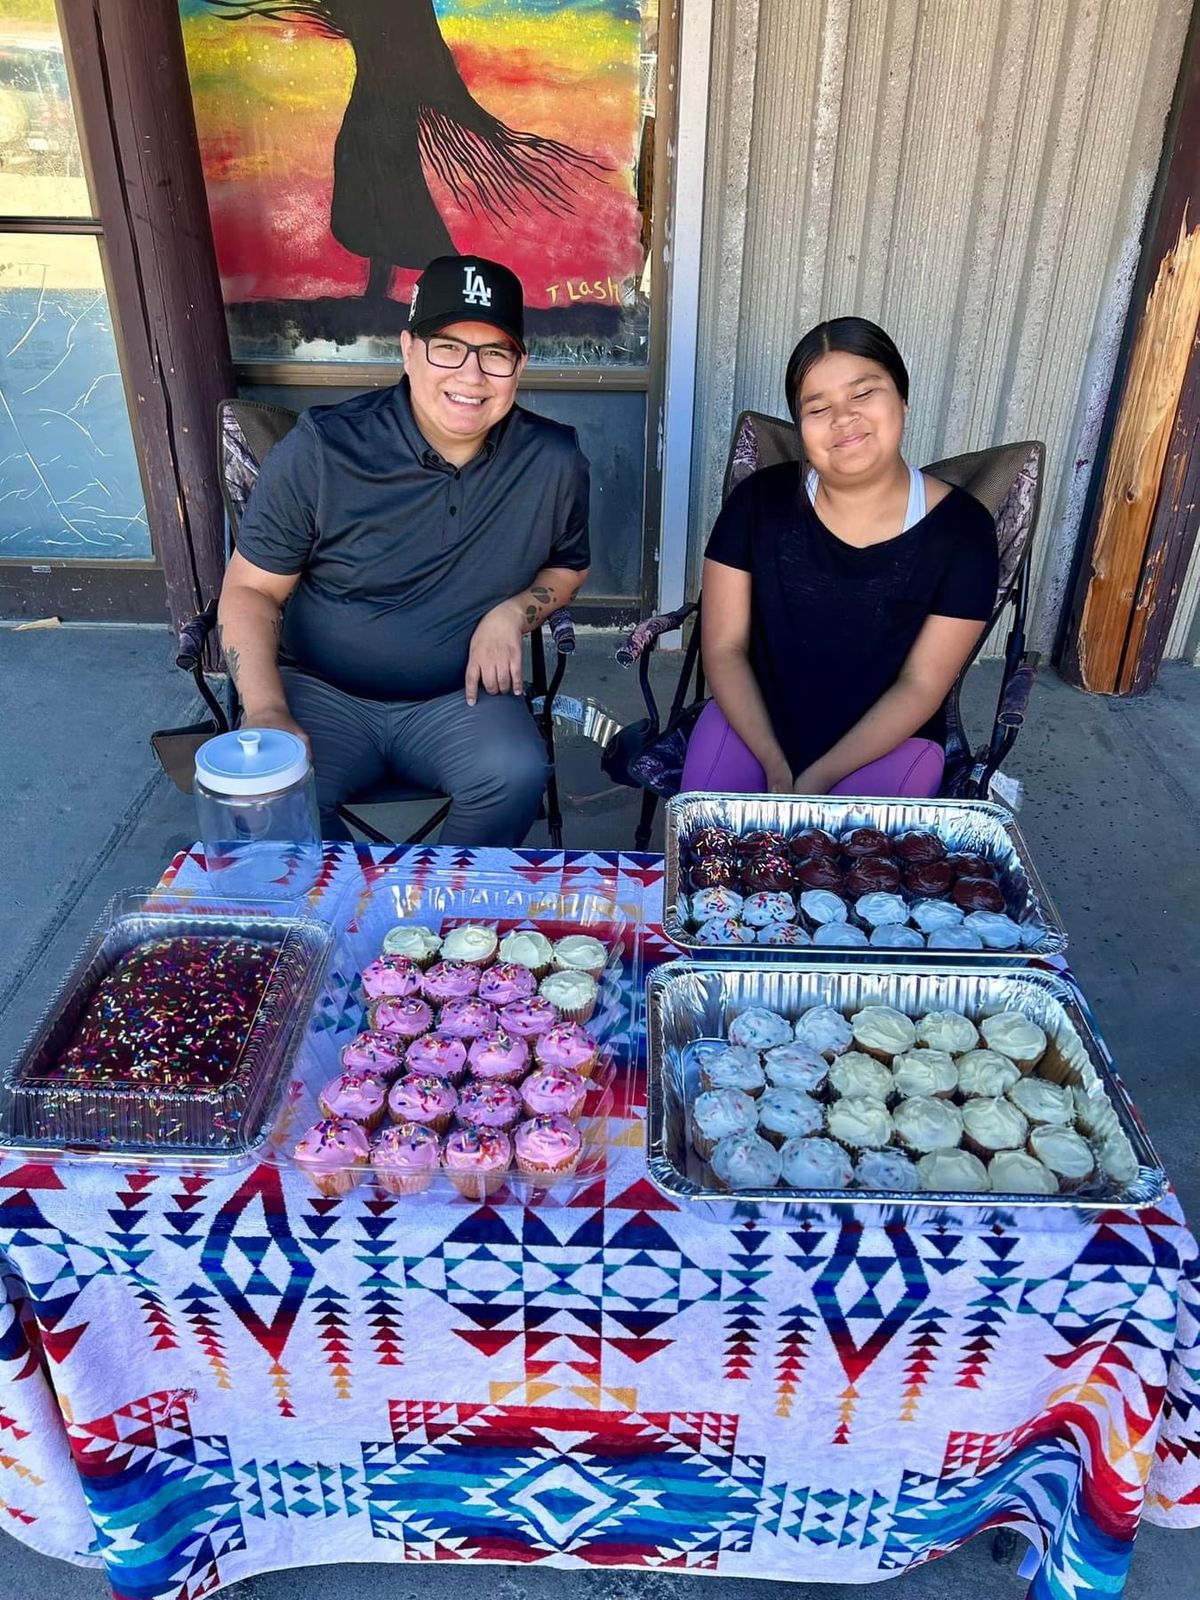 Melody "Sissy" Waskahat, 10, holds a bake sale to raise money for her role as Head Girl Dancer at the Pow-Wow at the Falls this weekend as part of the Expo 